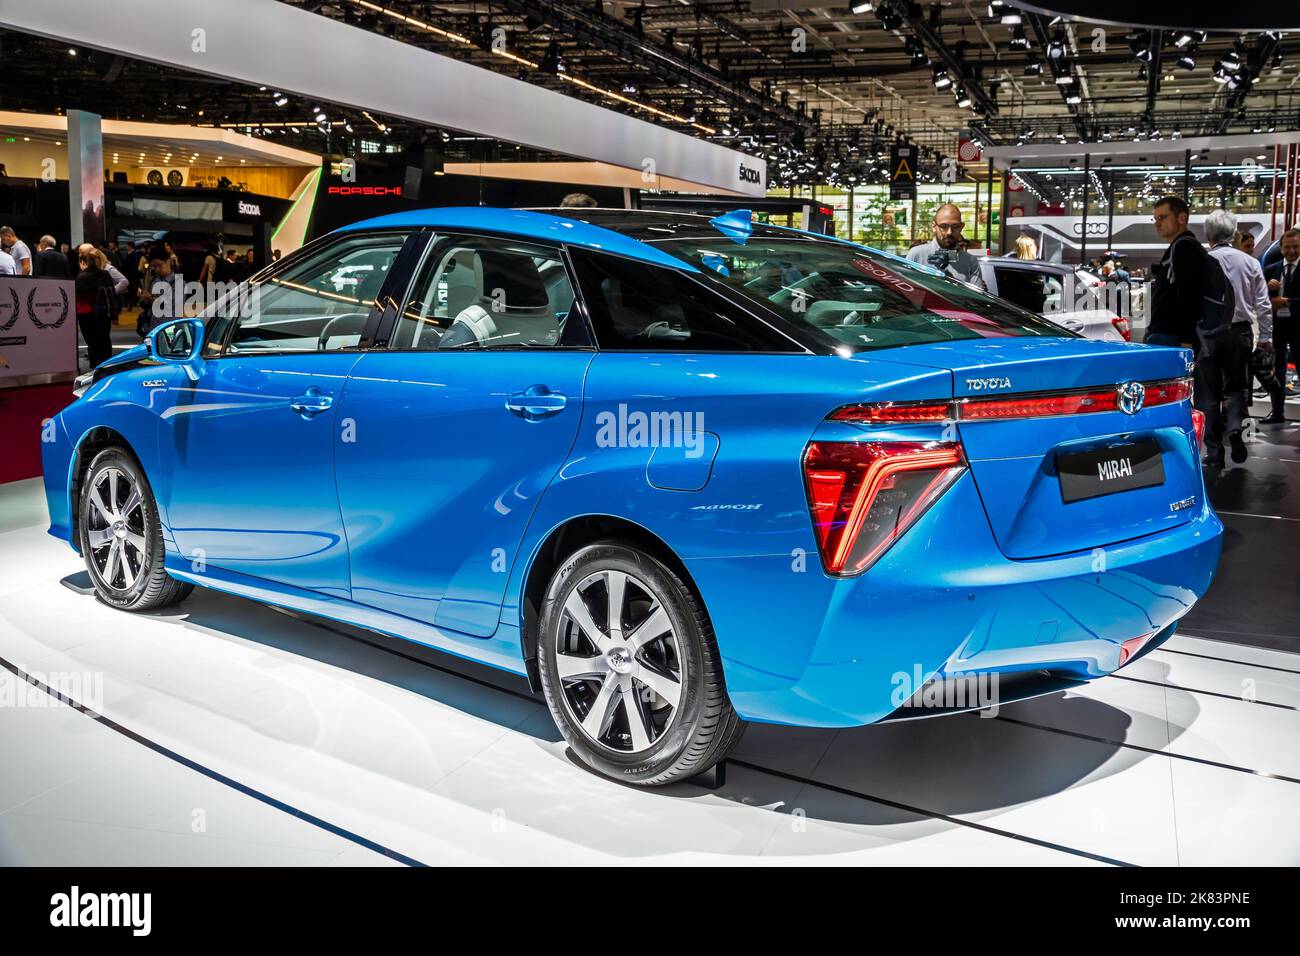 Toyota Mirai electric fuel cell vehicle showcased at the Paris Motor Show. Paris, France - October 2, 2018. Stock Photo